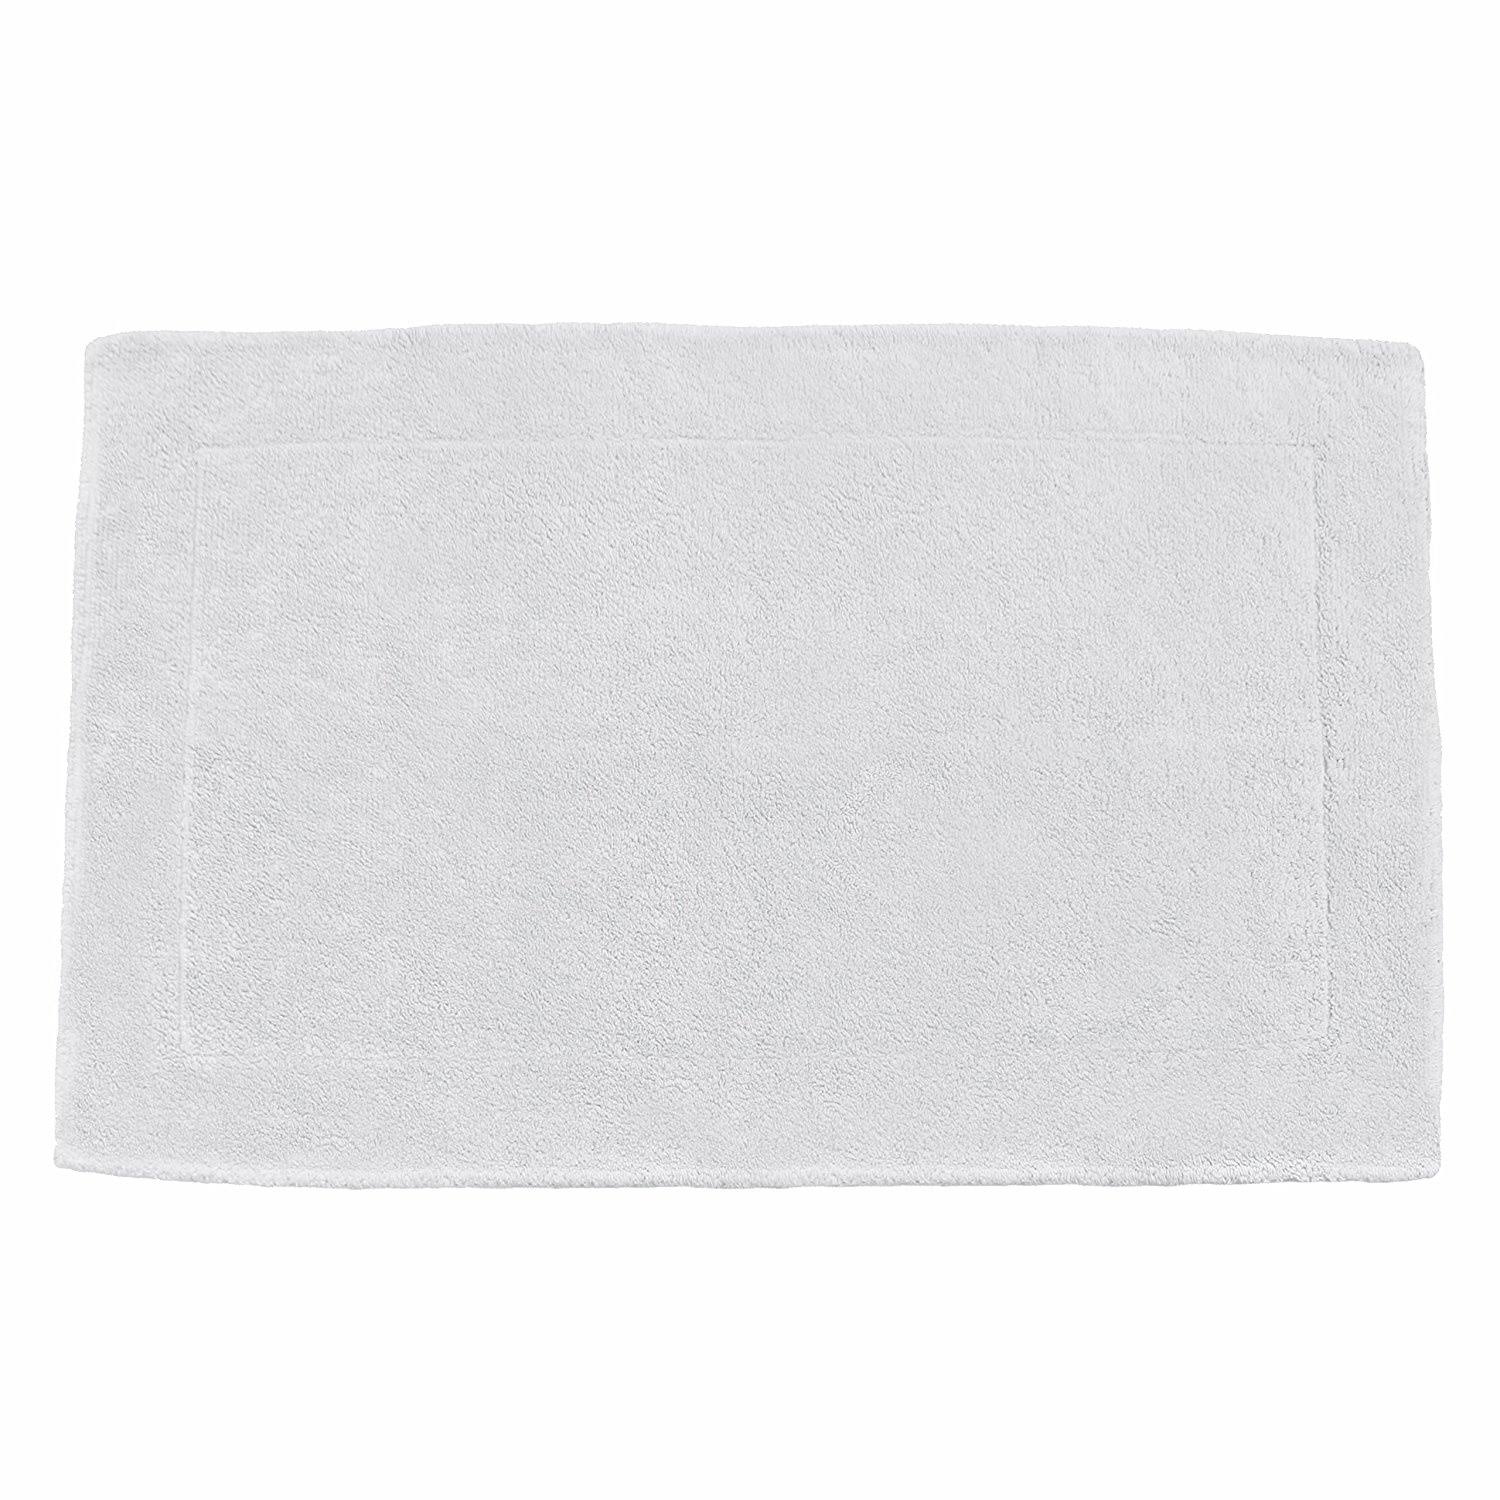 Abyss Double (50cm x 80cm ) Tub Bath Mat - (100) White | Bathroom | 30 Day Money Back Guarantee | Free Shipping on All Orders | Best Price Guarantee